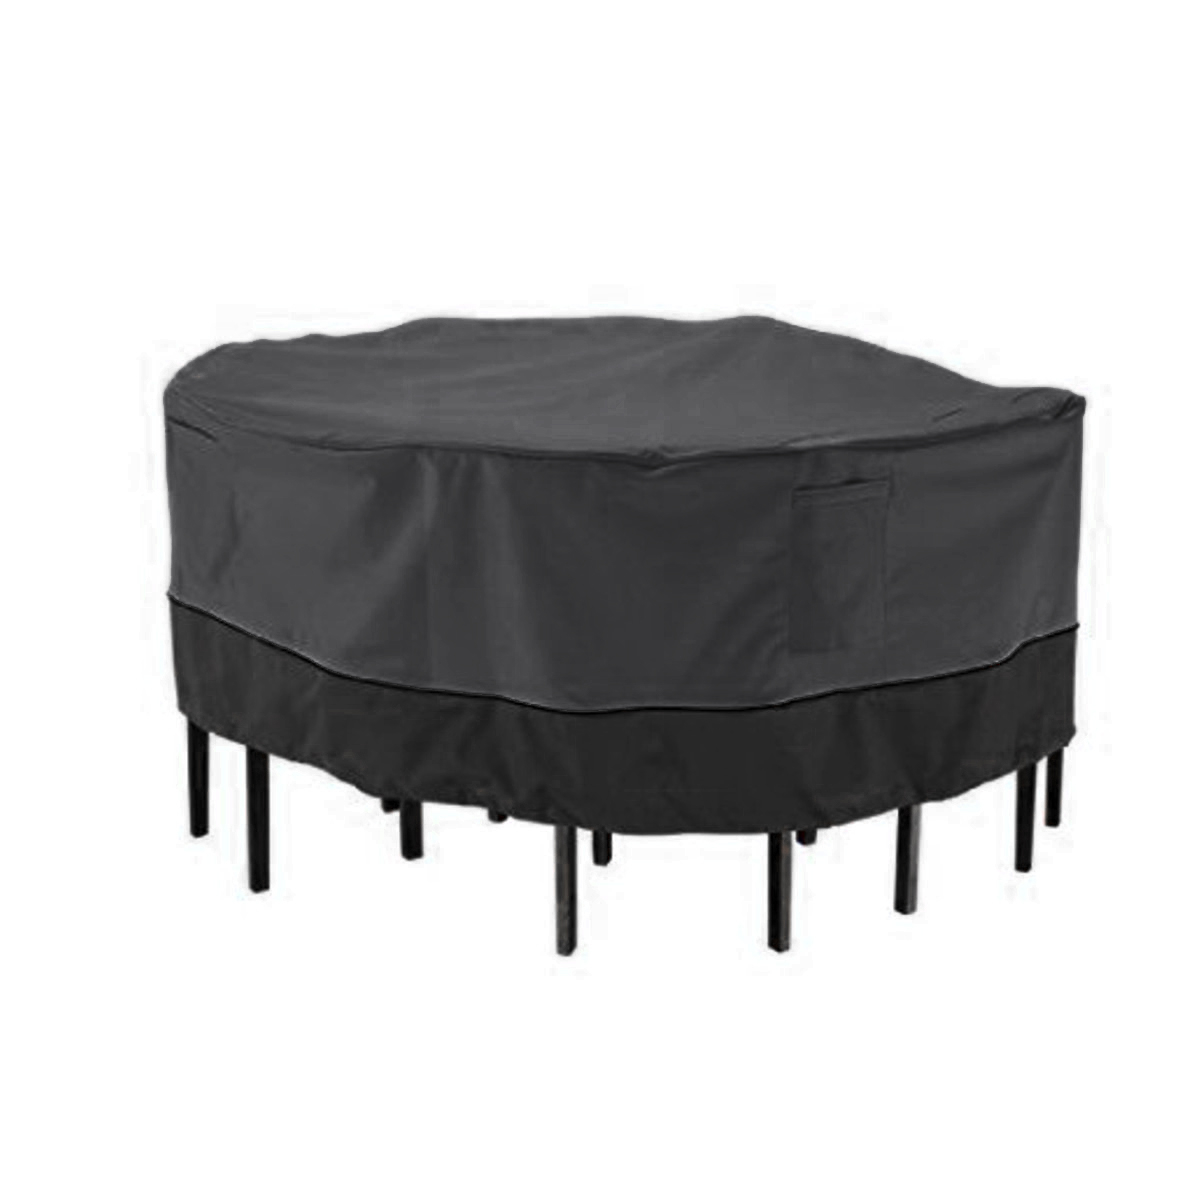 Outdoor Garden Patio Furniture Table Waterproof Cover Anti Dust Protector within size 1200 X 1200